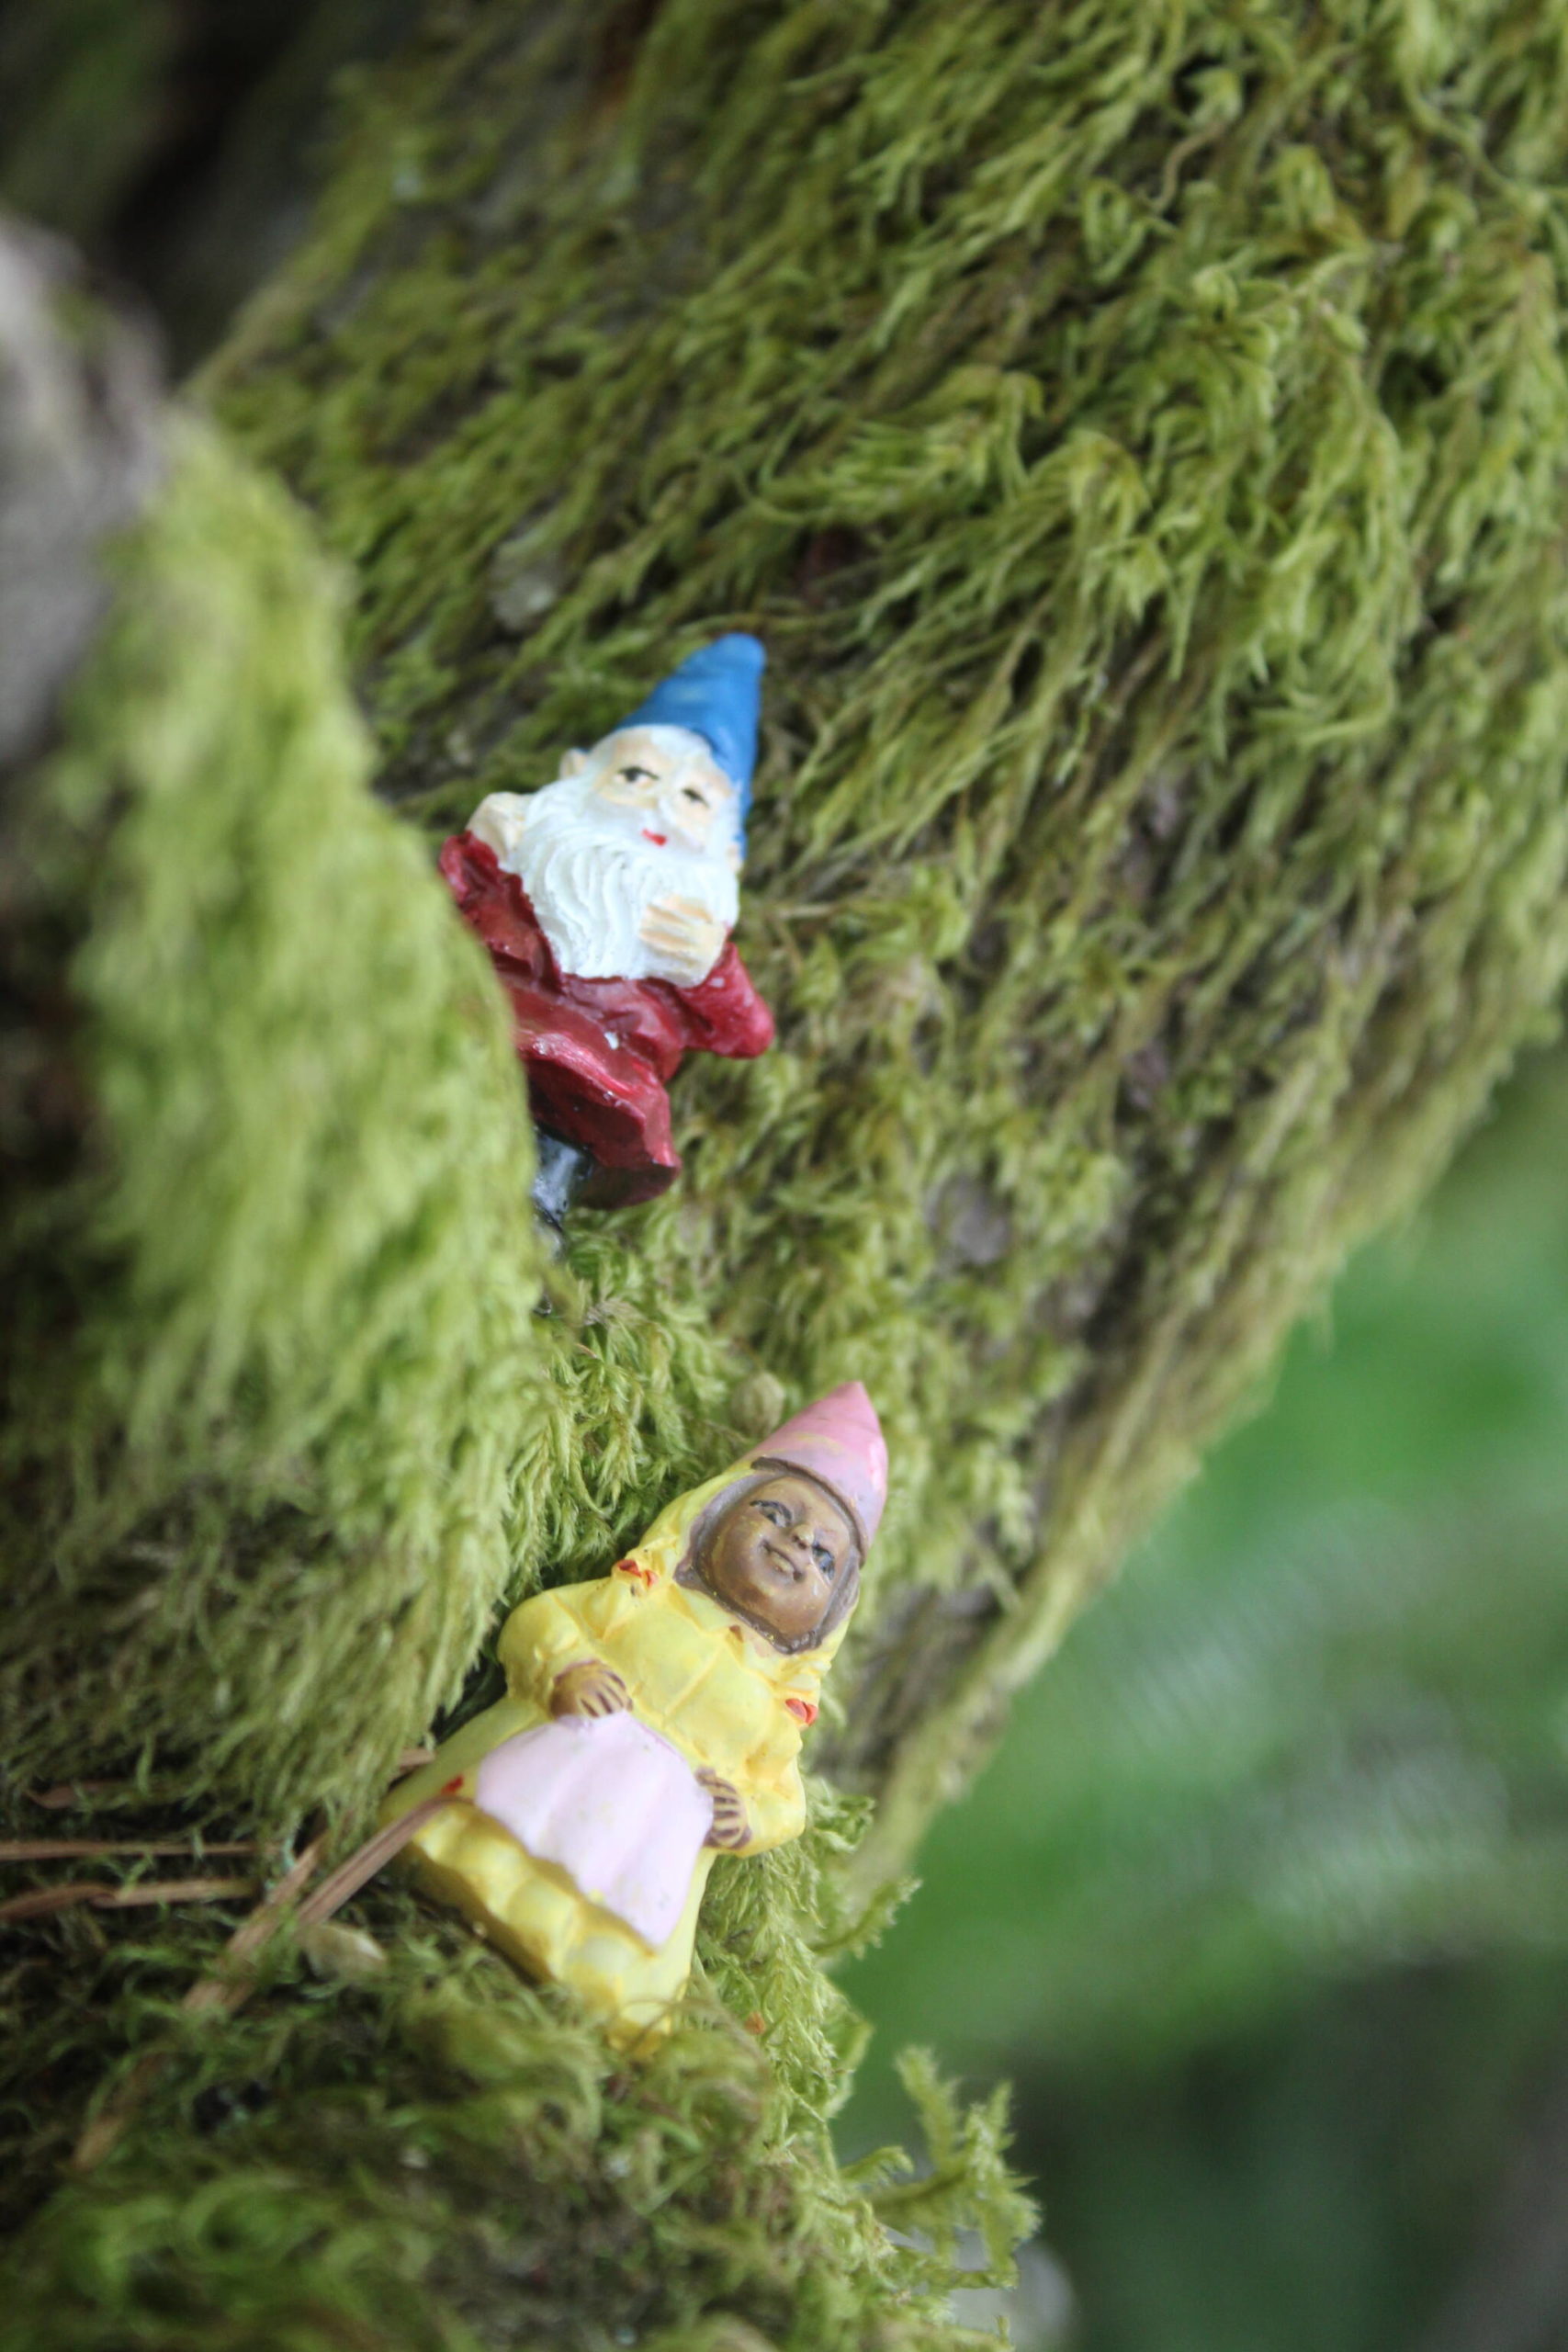 The Gnome Trail is located across from Rock Creek Elementary School, 25700 Maple Valley Black Diamond Rd SE, Maple Valley. Photos by Bailey Jo Josie/Sound Publishing